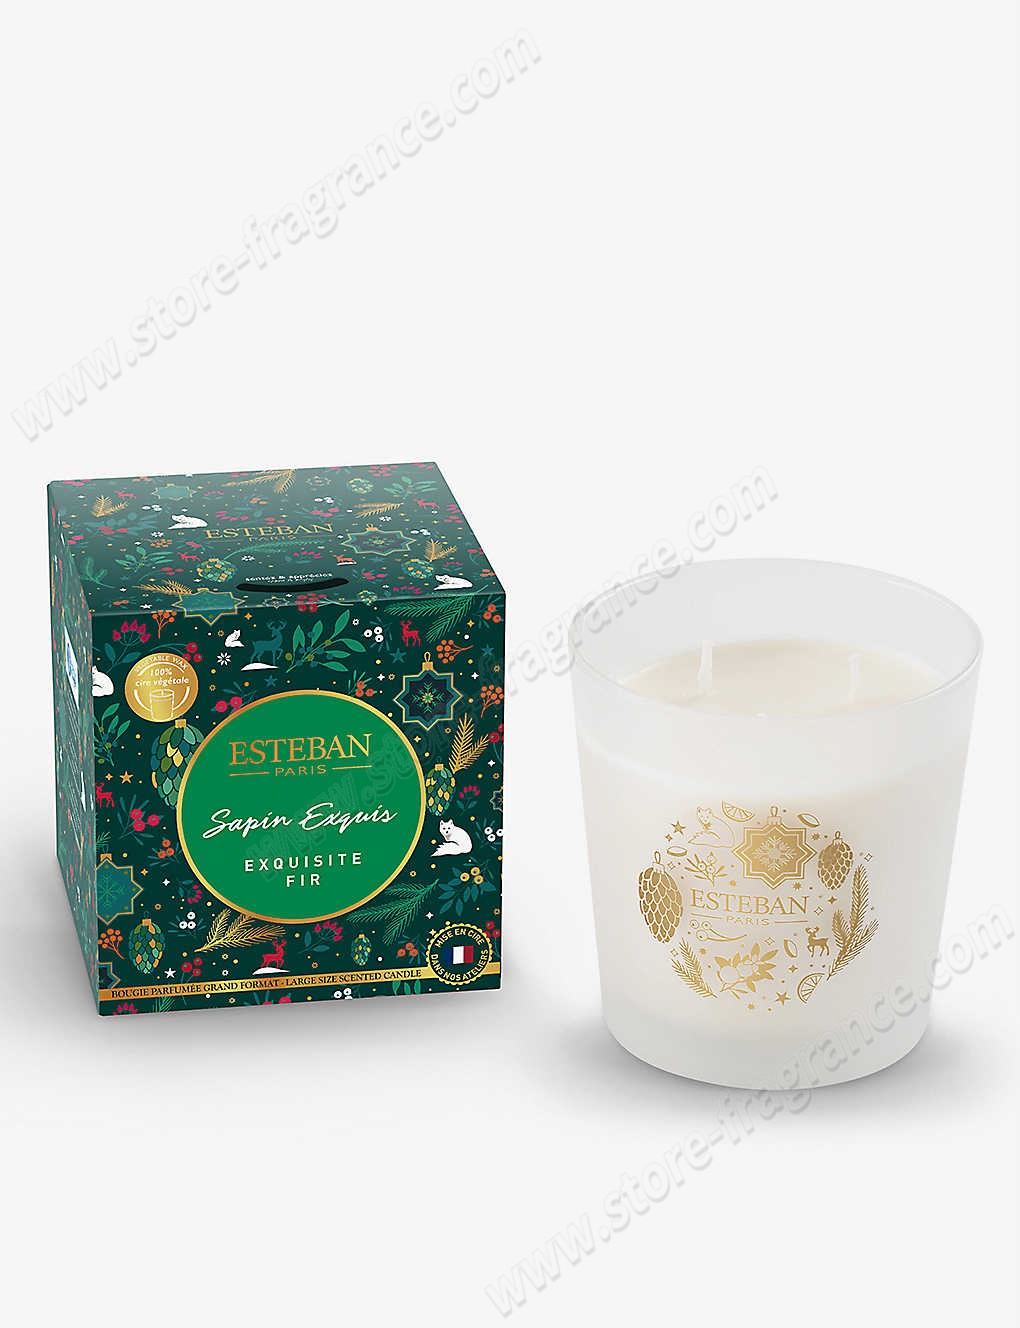 ESTEBAN/Exquisite Fir scented candle 450g ✿ Discount Store - ESTEBAN/Exquisite Fir scented candle 450g ✿ Discount Store